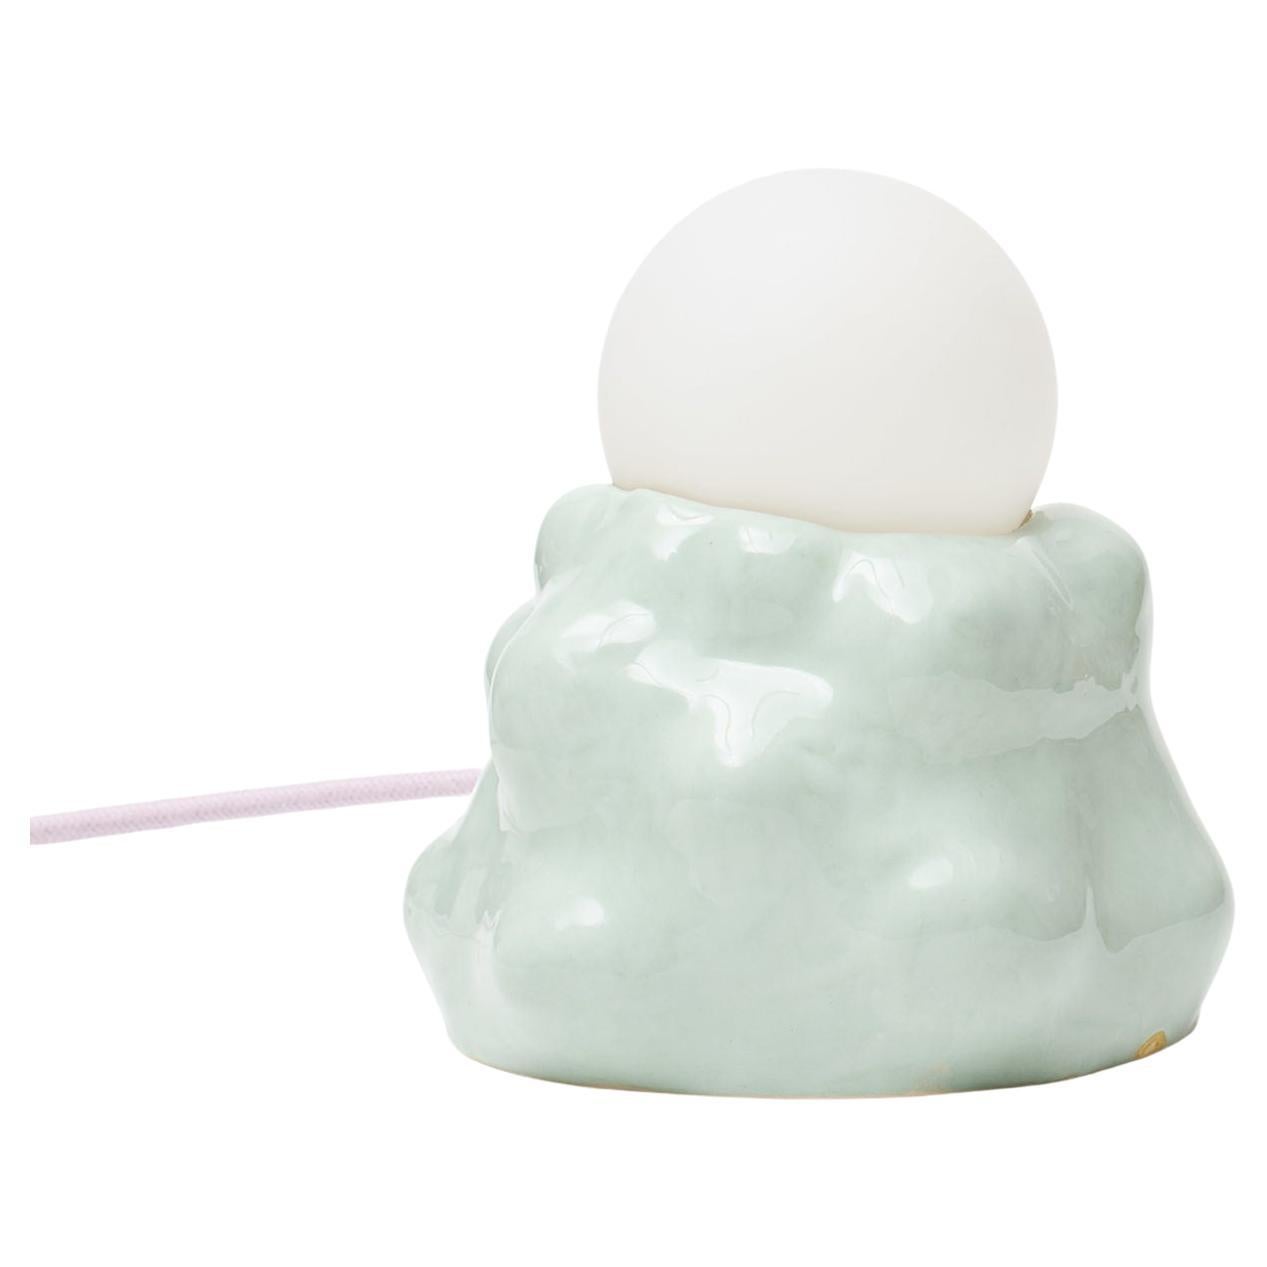 Minty Bubble Lamp by Siup Studio For Sale